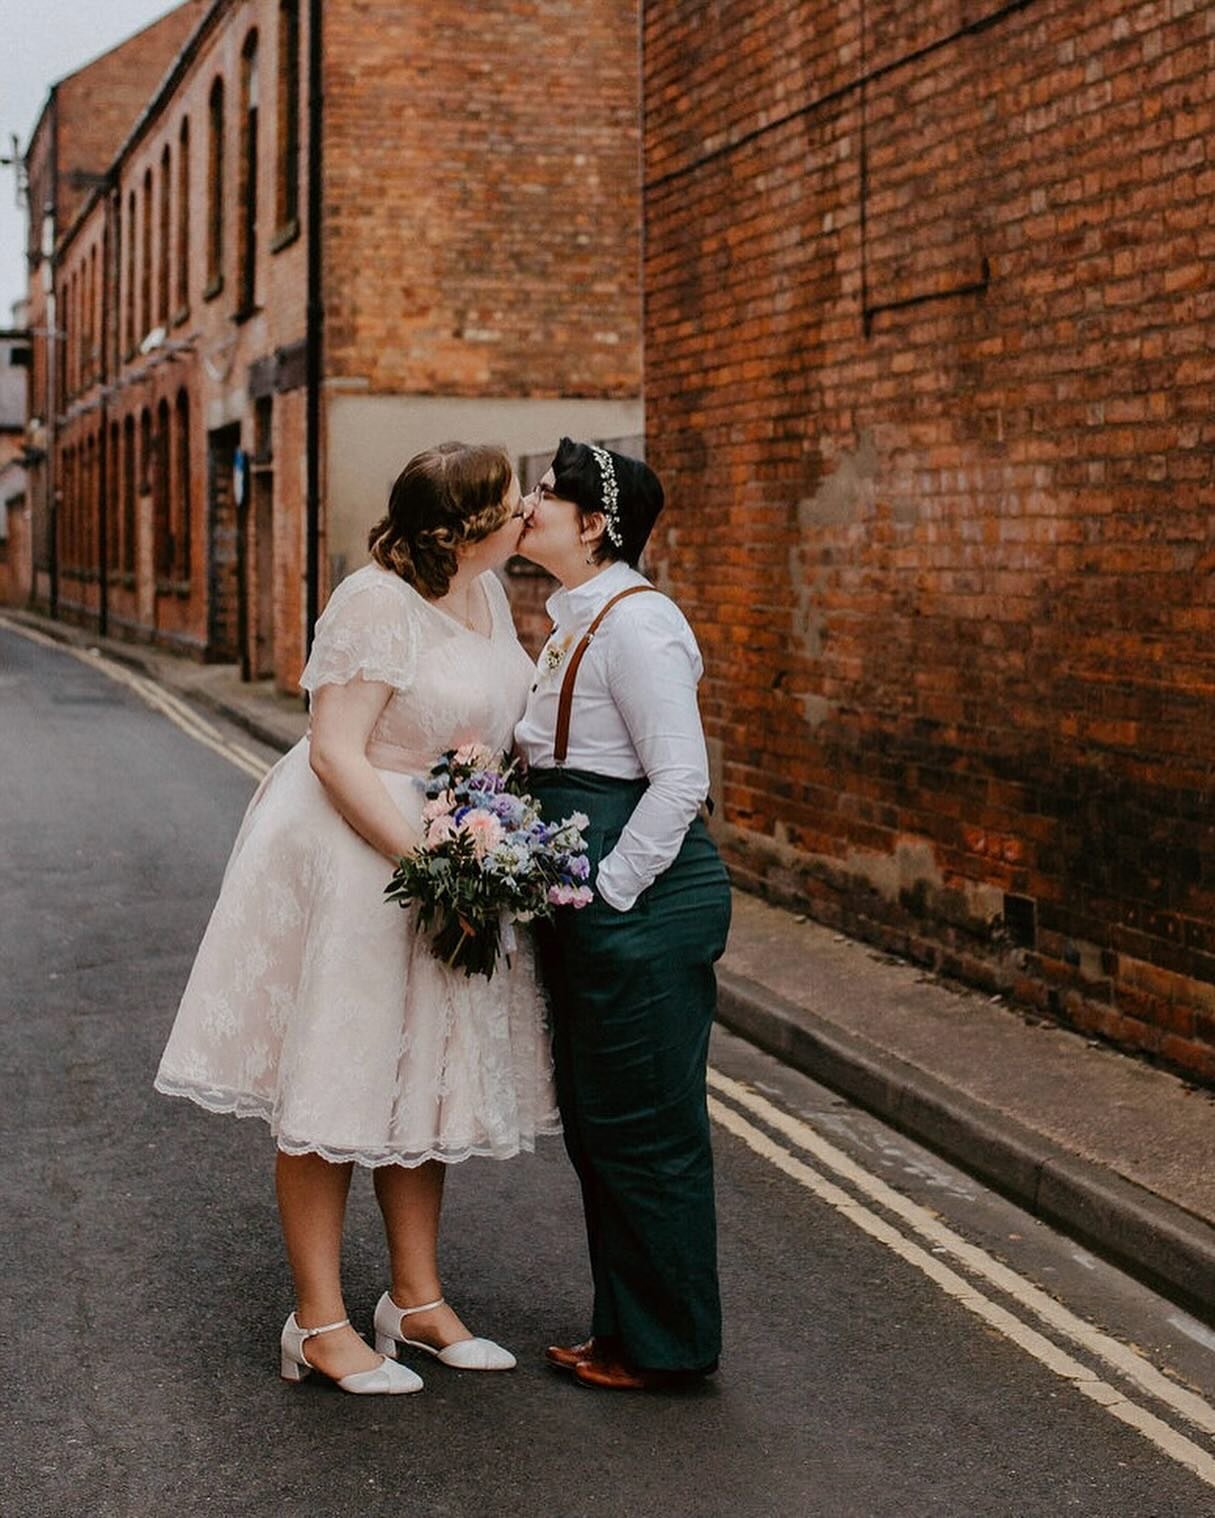 &bull; still &bull; one of my favourite ever sets of photos.

I love the urban city setting, the vintage tea party vibes; pure joy and love captured perfectly.

📸 @anna.rose.heaton 

#citywedding 
#sharingtheflorallove 
#excessivelydivertedbyflowers